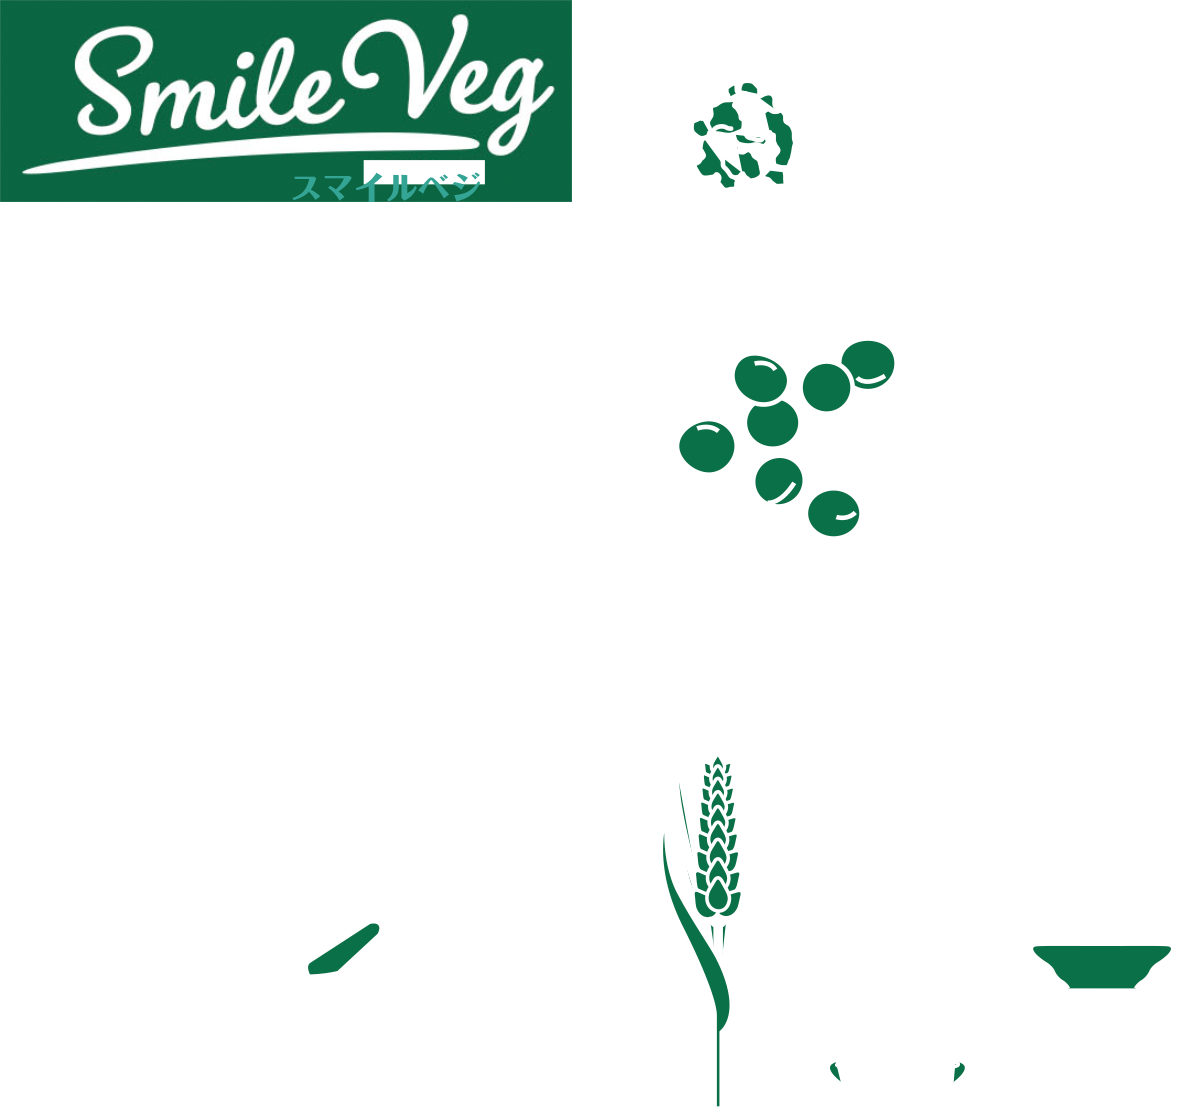 Smile Beg スマイルベジ｜Soup,Soy,Noodle